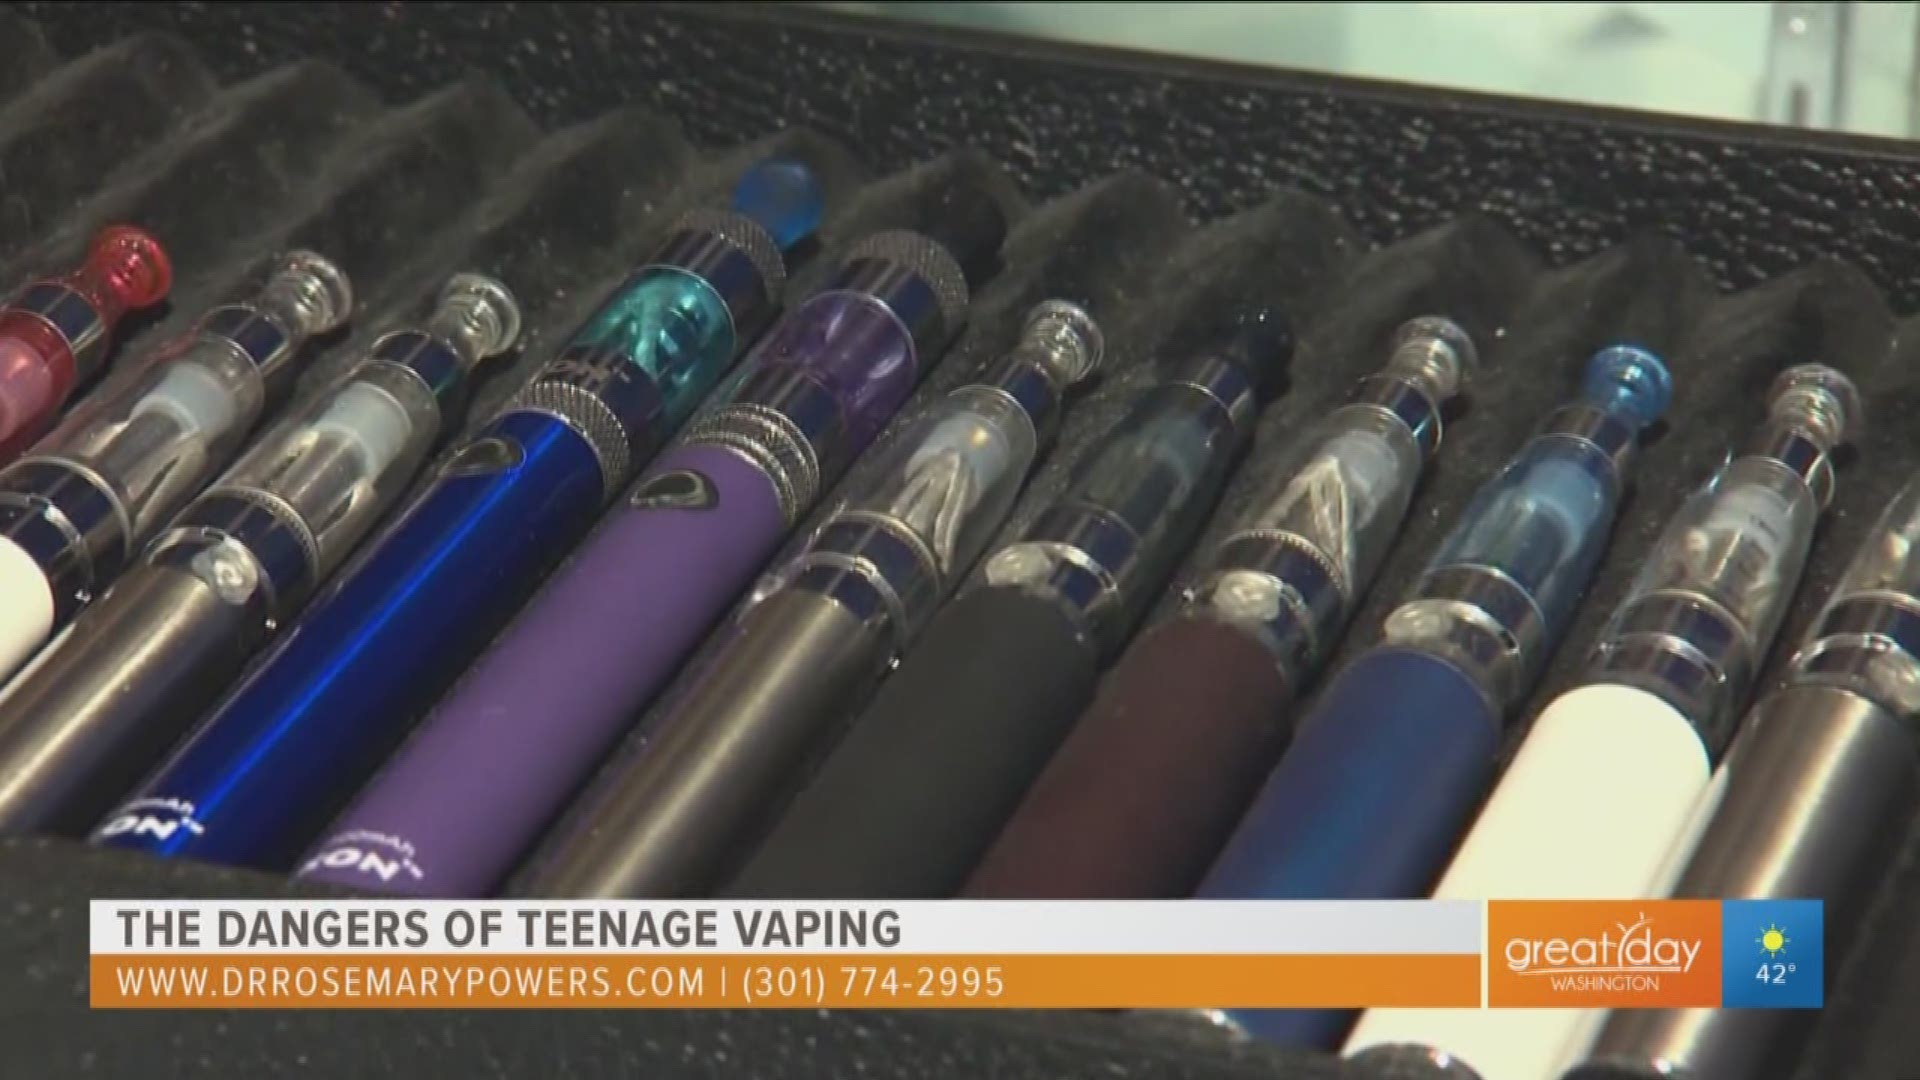 These facts will convince your teenager to stay away from vaping!  Dr. Rosemary J-L Powers president and director of AccessAbility MedCare, LLC outlines the dangers of vaping among young people. For more information visit www.AccessAbilityMedcare.com or call 301-774-2995.